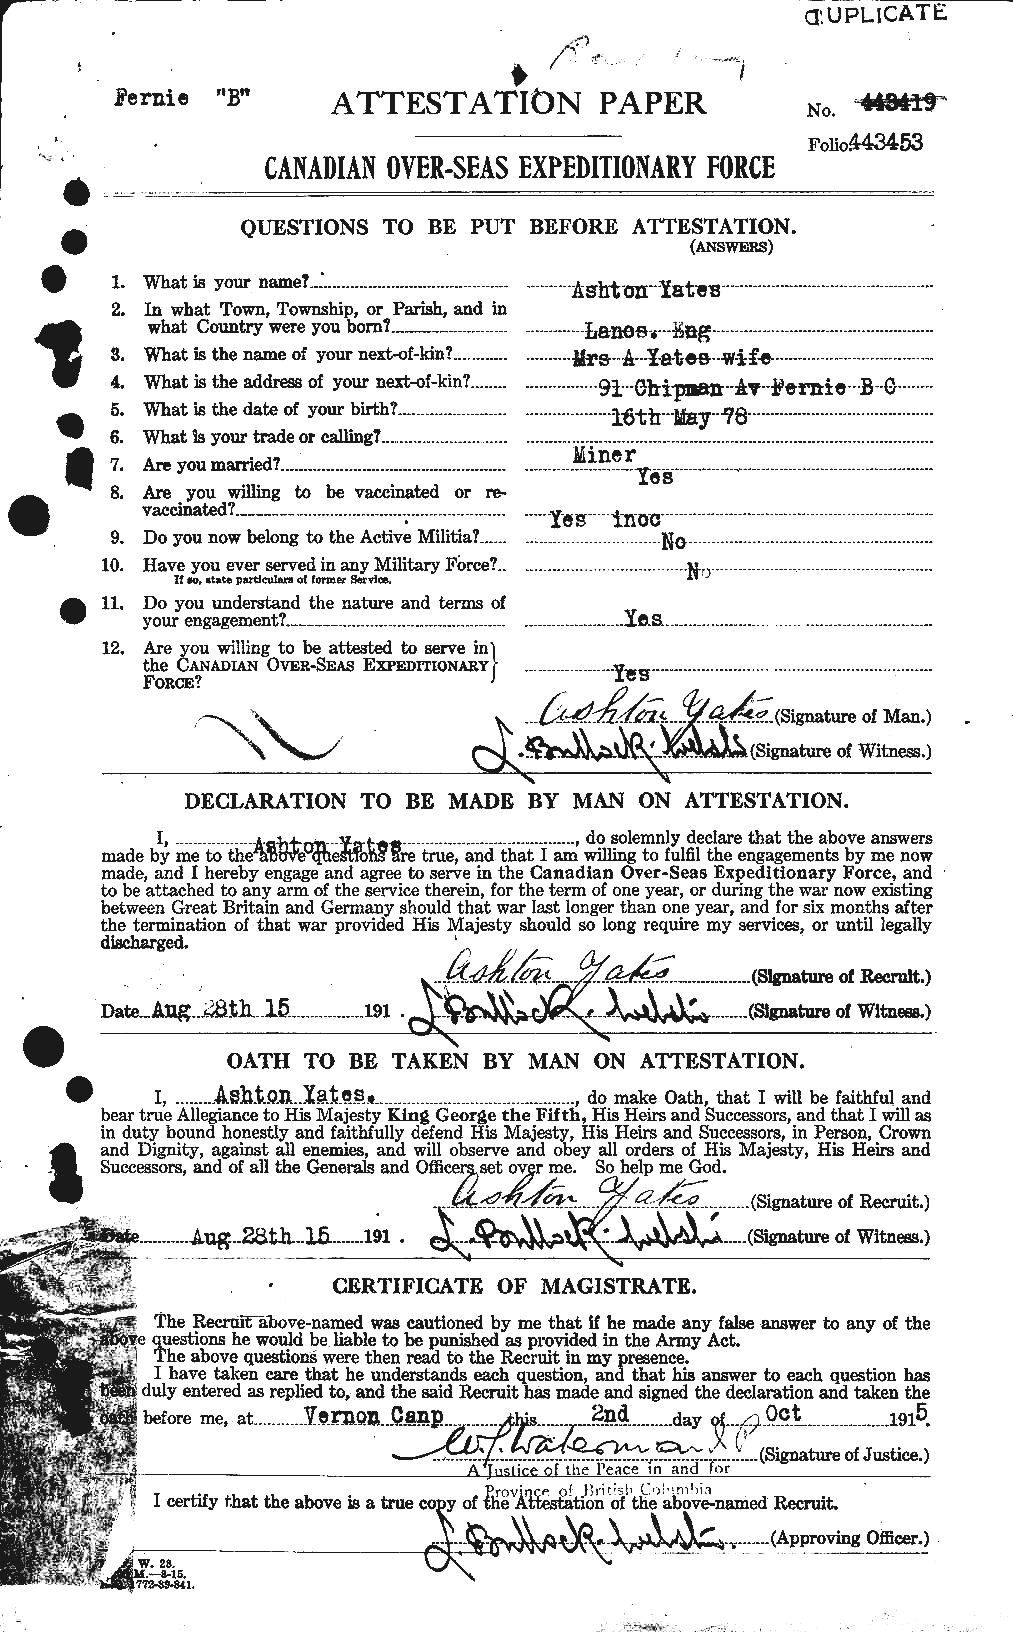 Personnel Records of the First World War - CEF 689626a